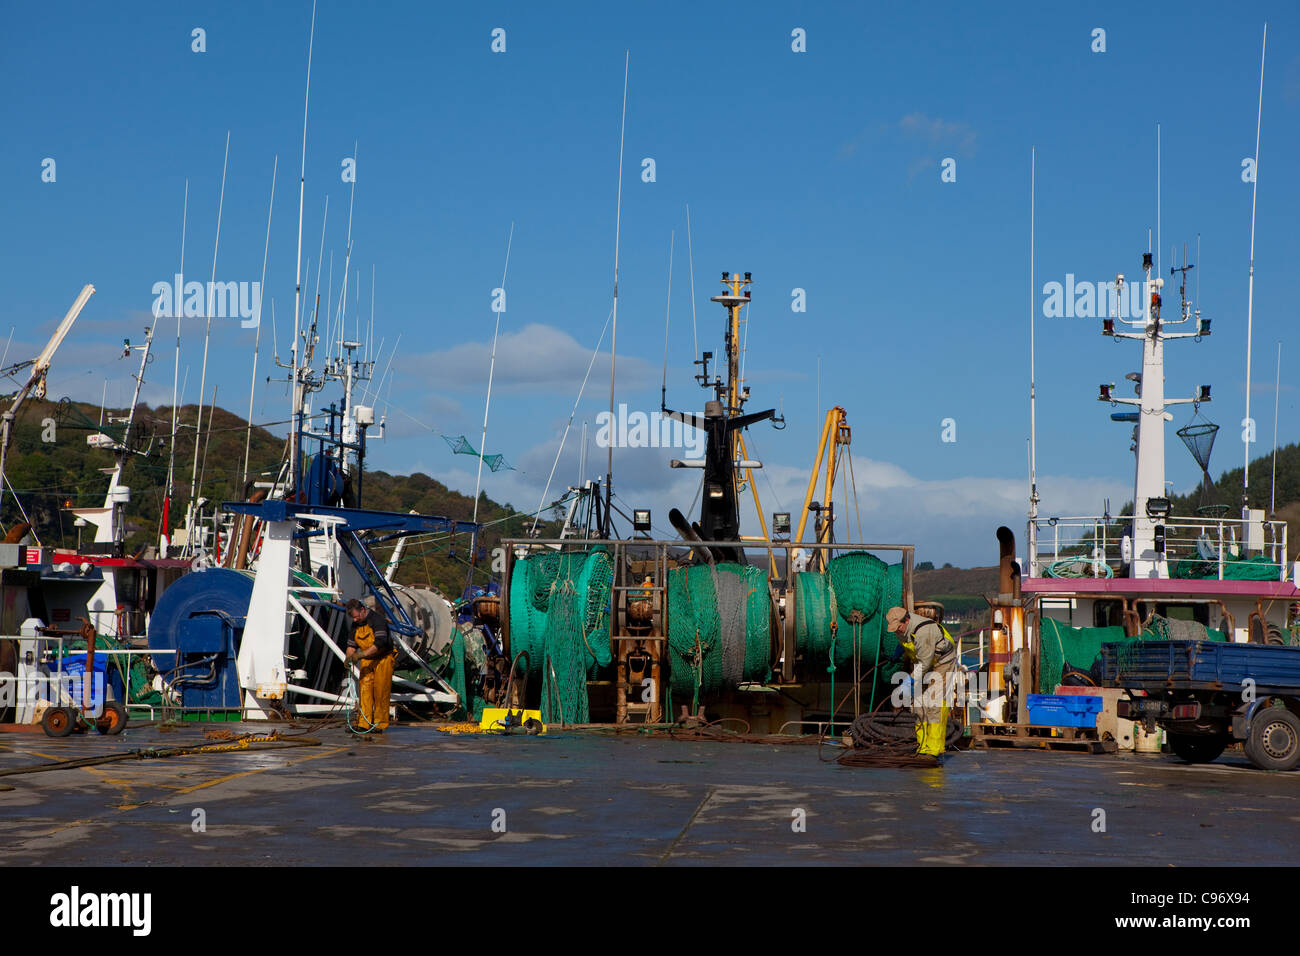 Fishing boats in the village Union Hall, West Cork, Ireland. Union Hall is synonymous with fresh fish. Stock Photo